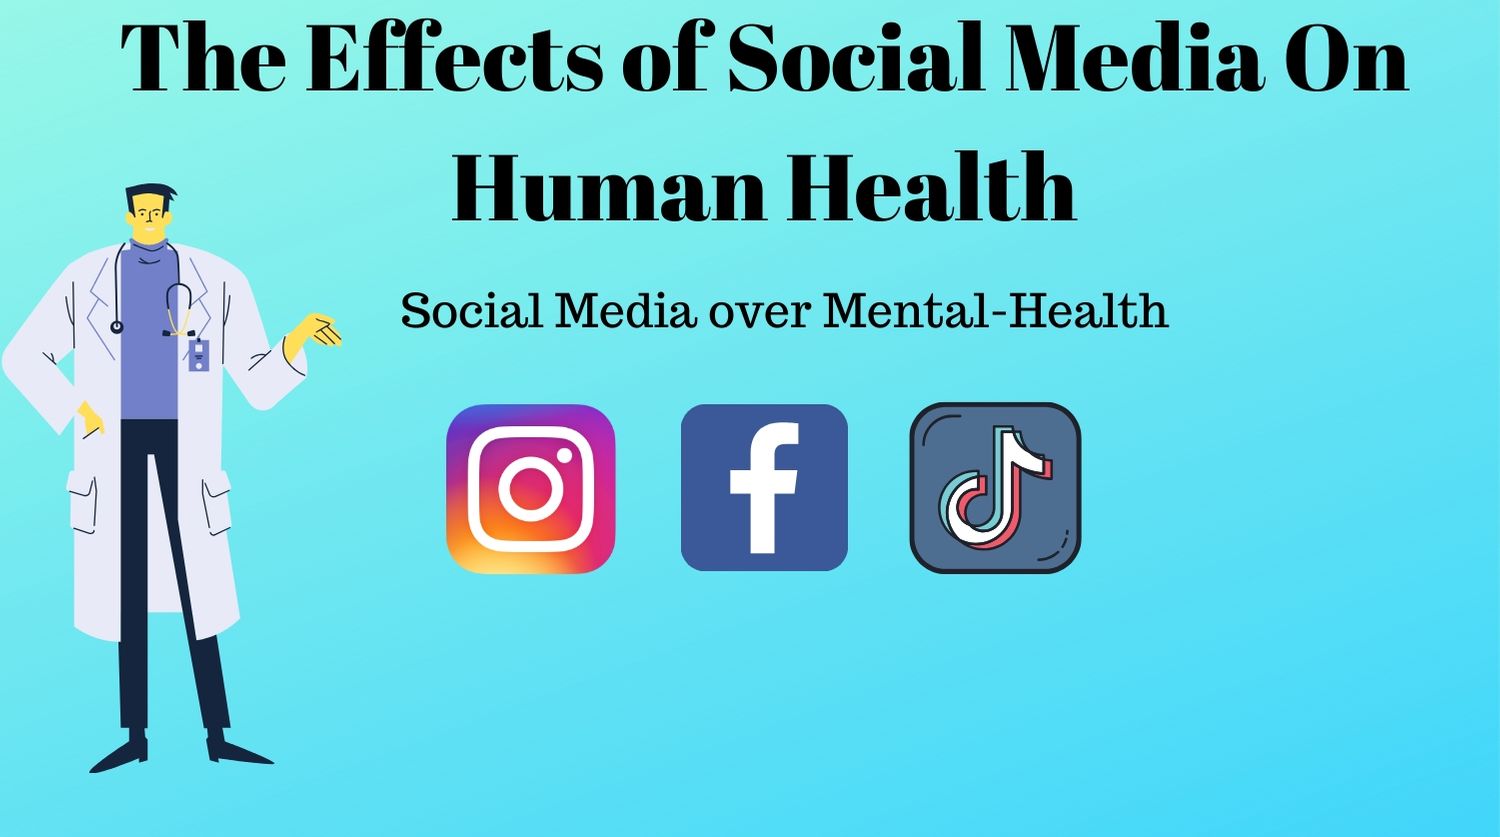 The Effects of Social Media On Human Health